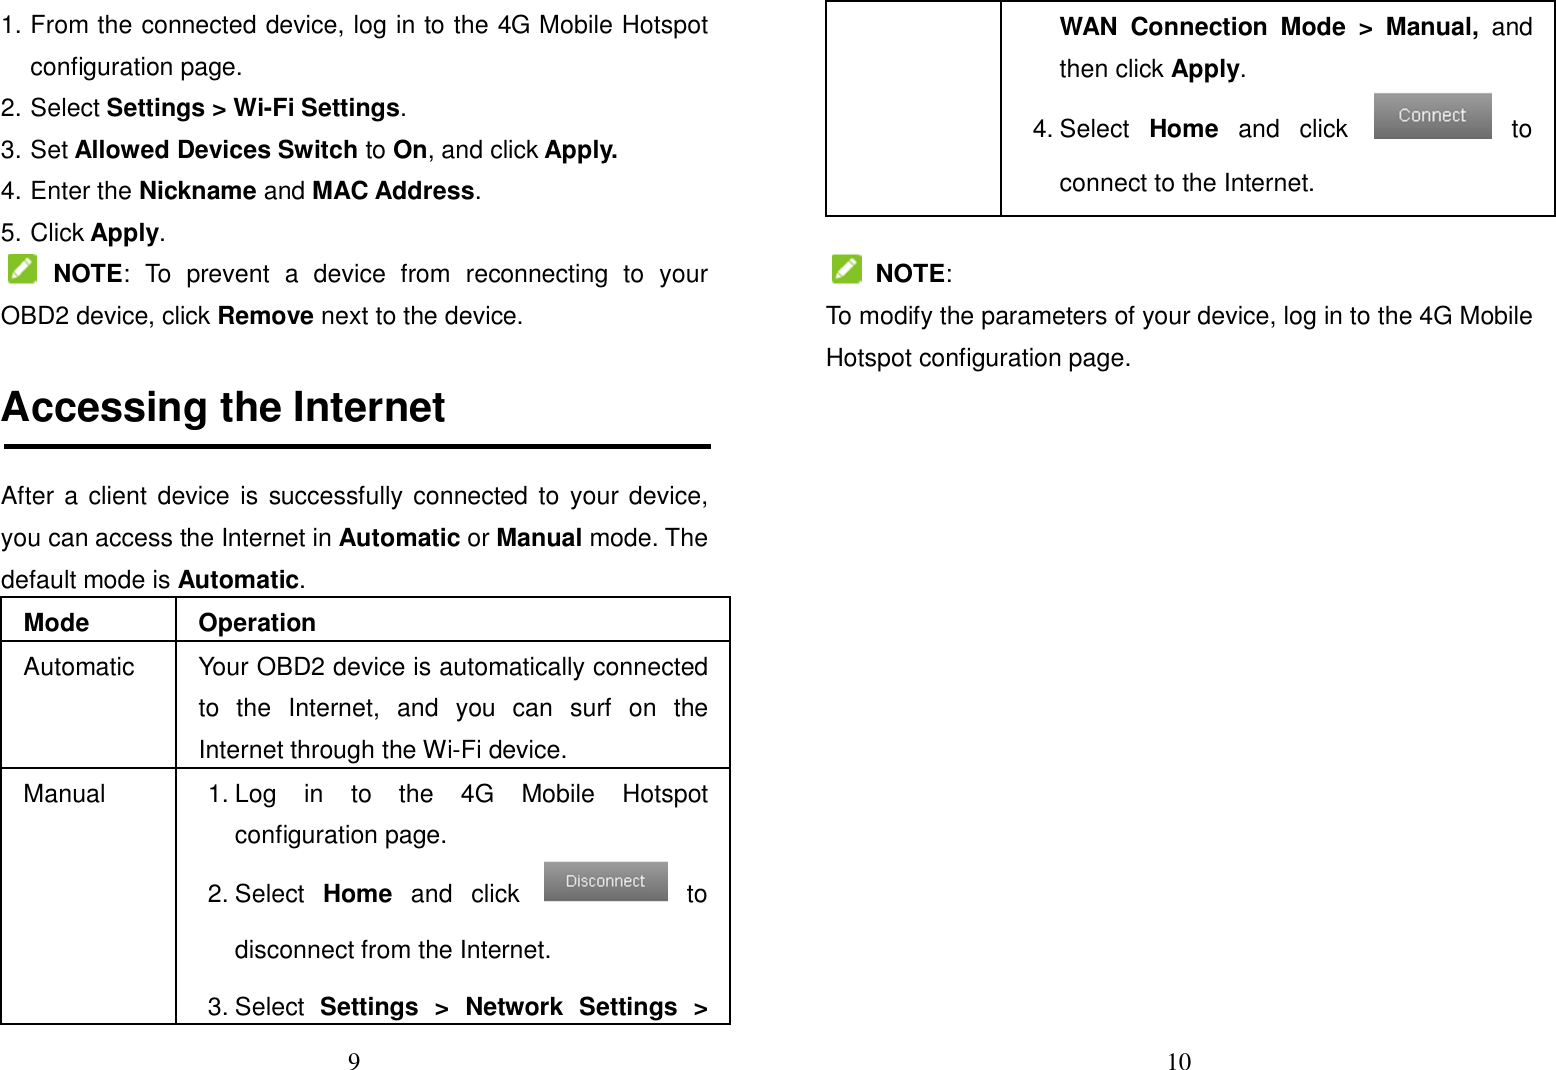 9  1. From the connected device, log in to the 4G Mobile Hotspot configuration page. 2. Select Settings &gt; Wi-Fi Settings. 3. Set Allowed Devices Switch to On, and click Apply. 4. Enter the Nickname and MAC Address. 5. Click Apply.   NOTE:  To  prevent  a  device  from  reconnecting  to  your OBD2 device, click Remove next to the device.  Accessing the Internet After a client device is successfully connected to your device, you can access the Internet in Automatic or Manual mode. The default mode is Automatic. Mode  Operation Automatic  Your OBD2 device is automatically connected to  the  Internet,  and  you  can  surf  on  the Internet through the Wi-Fi device. Manual  1. Log  in  to  the  4G  Mobile  Hotspot configuration page. 2. Select  Home  and  click    to disconnect from the Internet. 3. Select  Settings  &gt;  Network  Settings  &gt; 10  WAN  Connection  Mode  &gt;  Manual,  and then click Apply. 4. Select  Home  and  click    to connect to the Internet.   NOTE: To modify the parameters of your device, log in to the 4G Mobile Hotspot configuration page.                 